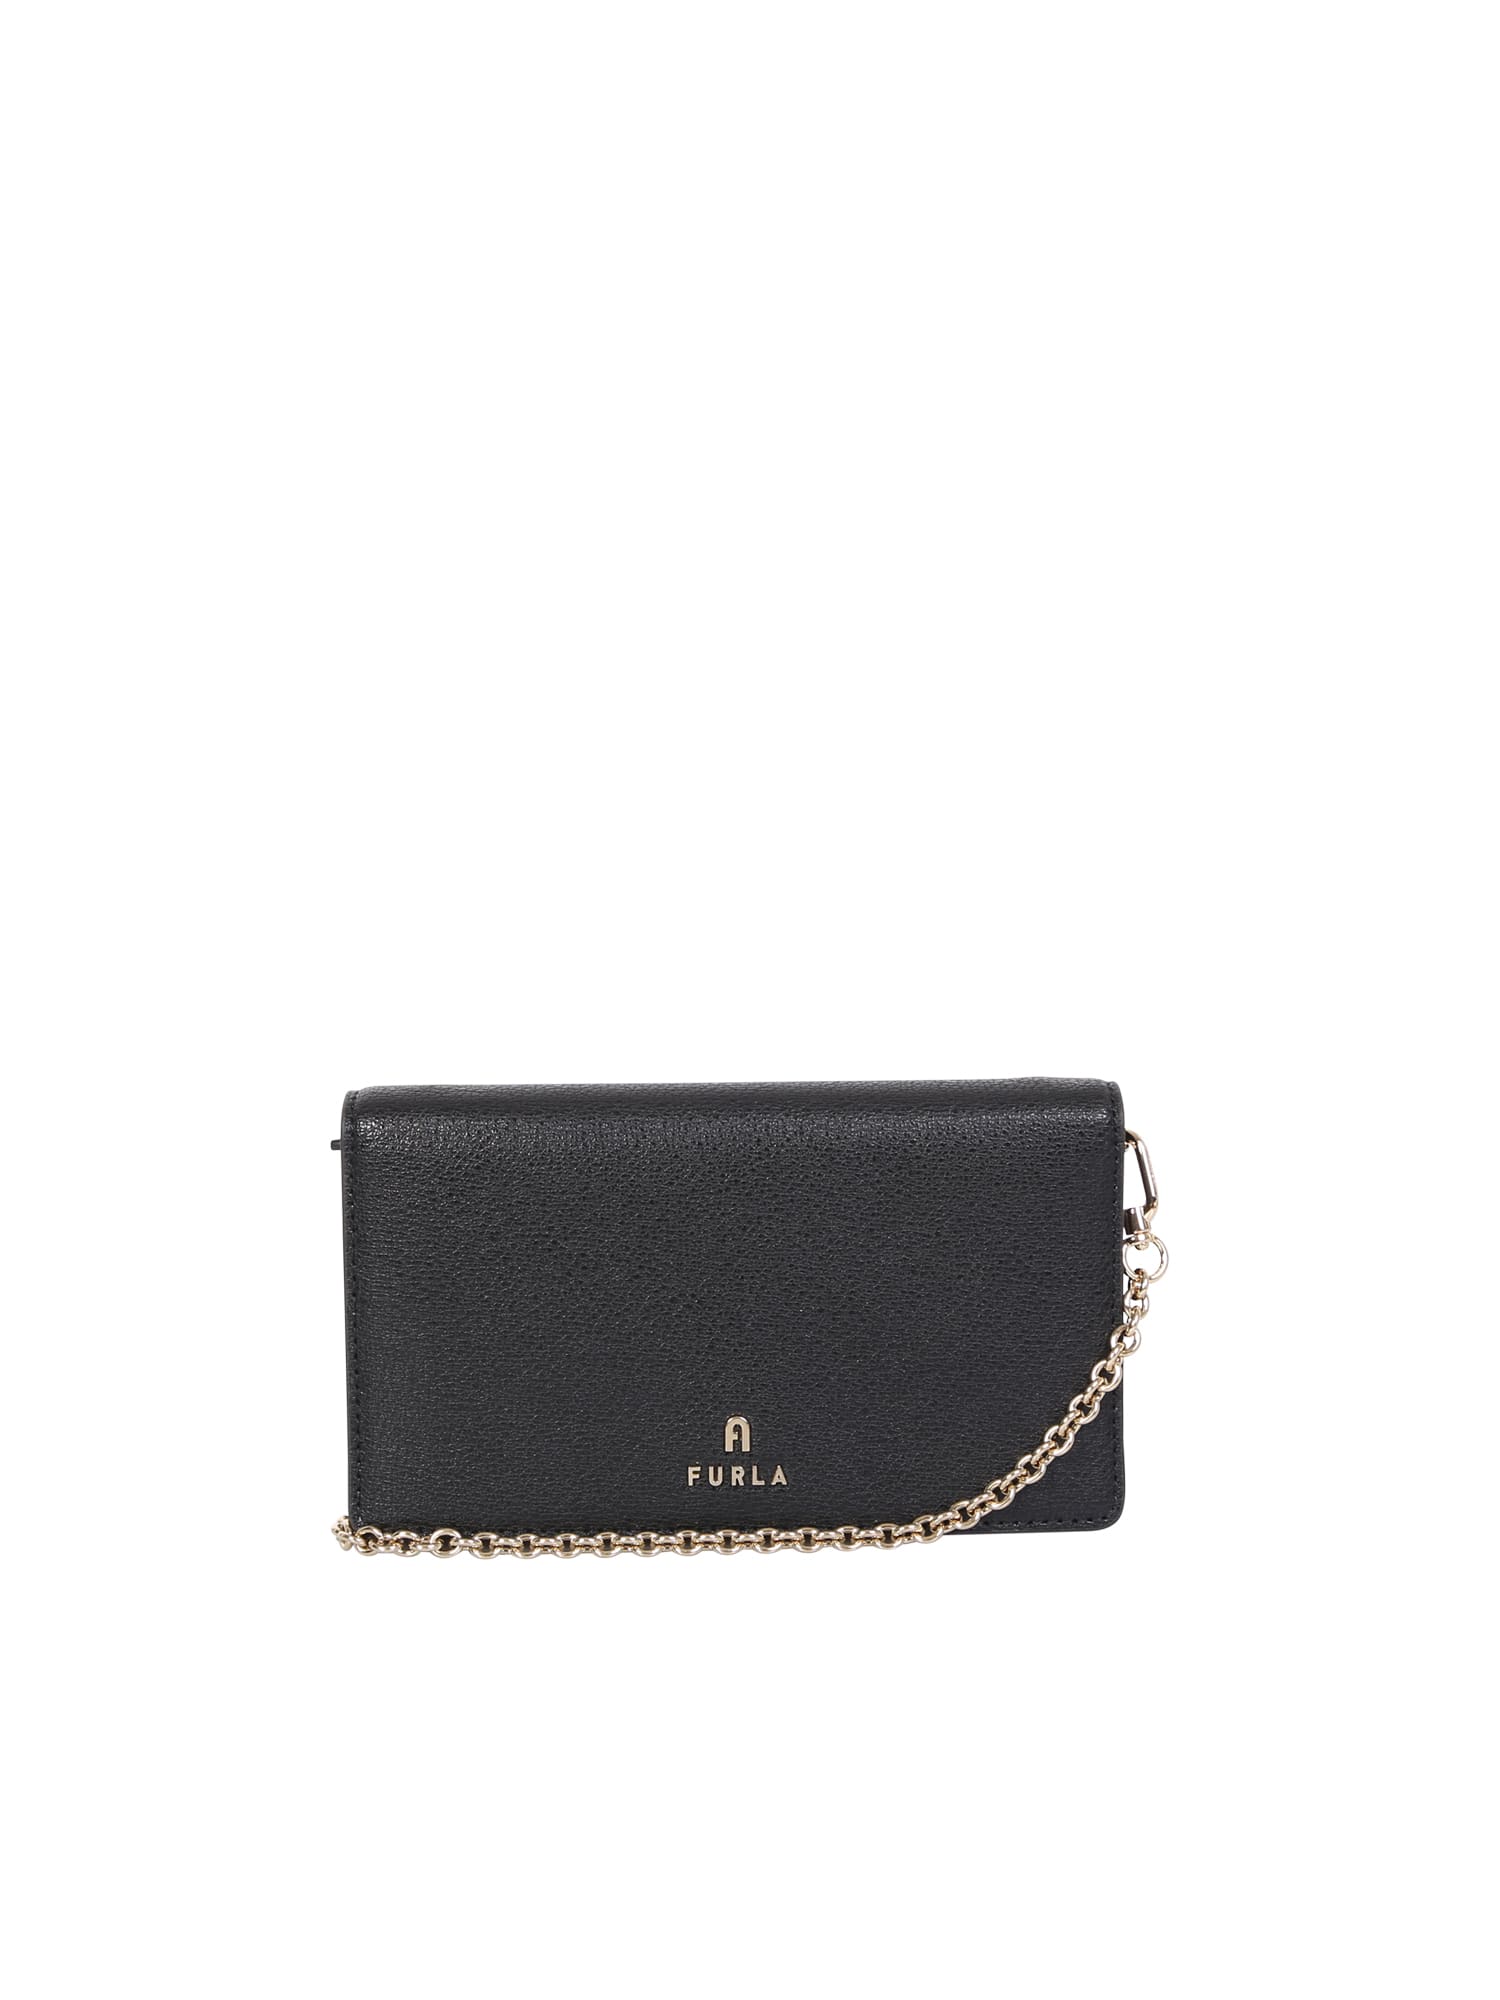 Furla Magnolia Wallet With Chain By | italist